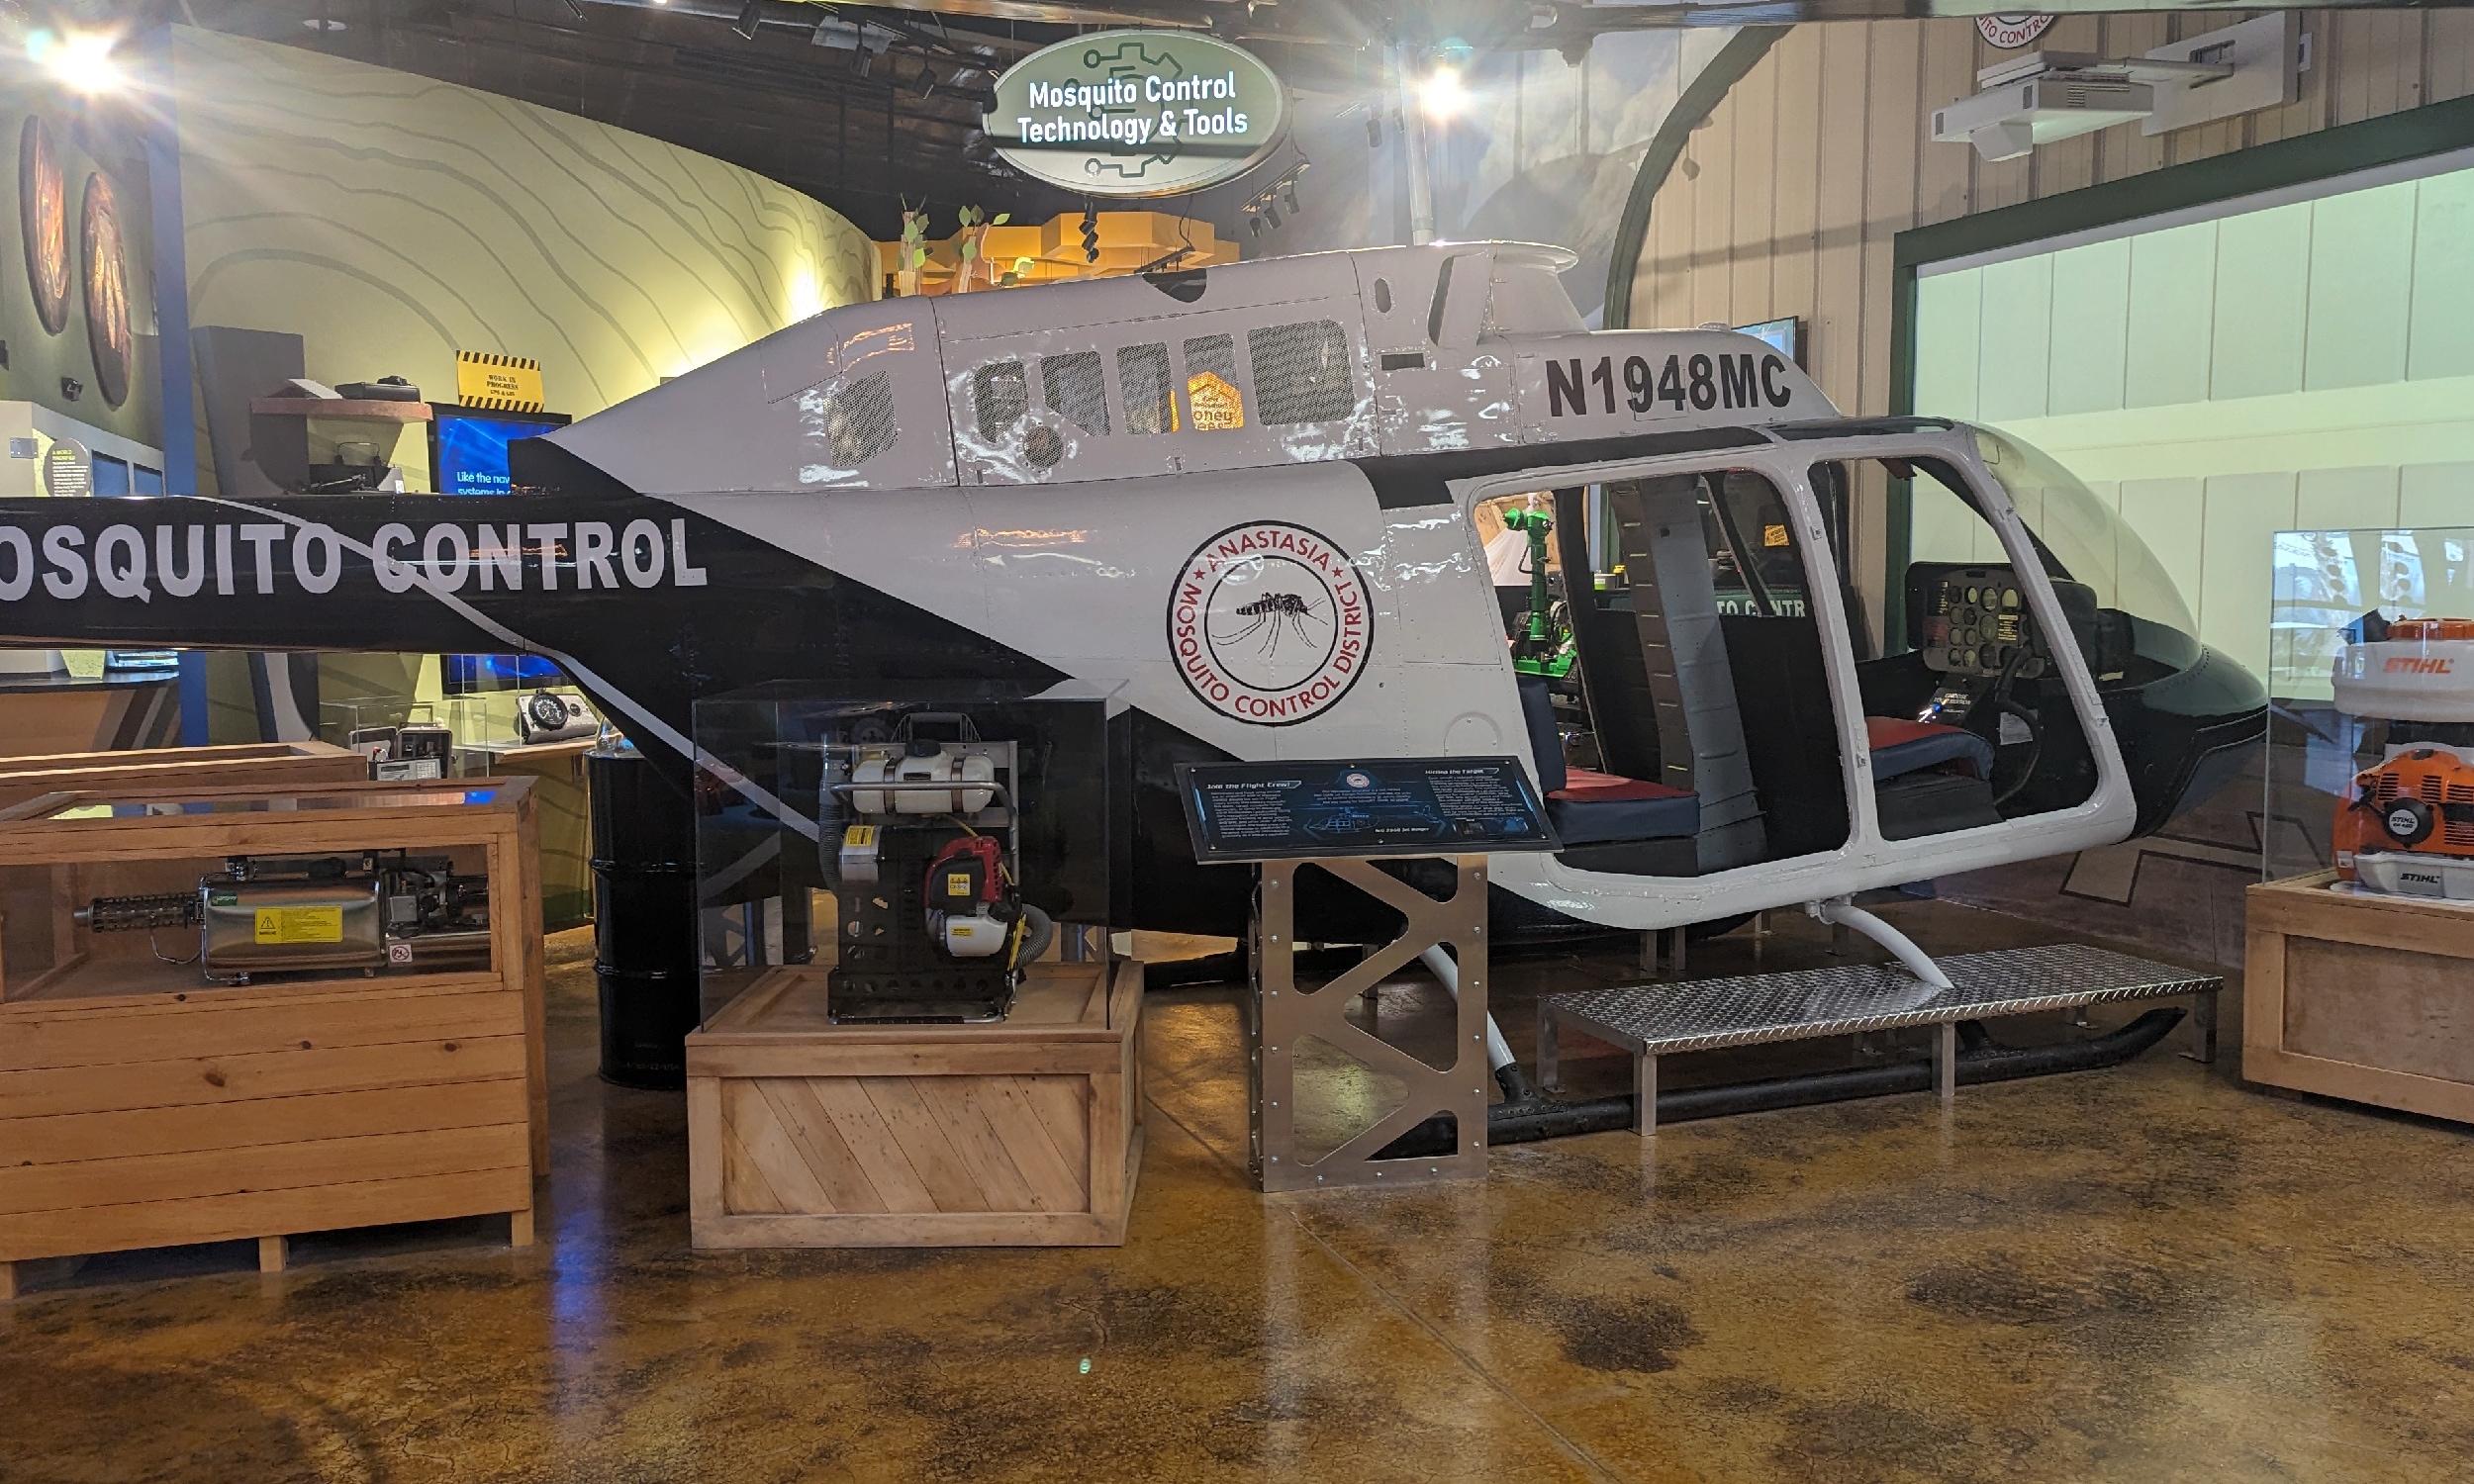 A small helicopter, inside an education center sits with items used to run it